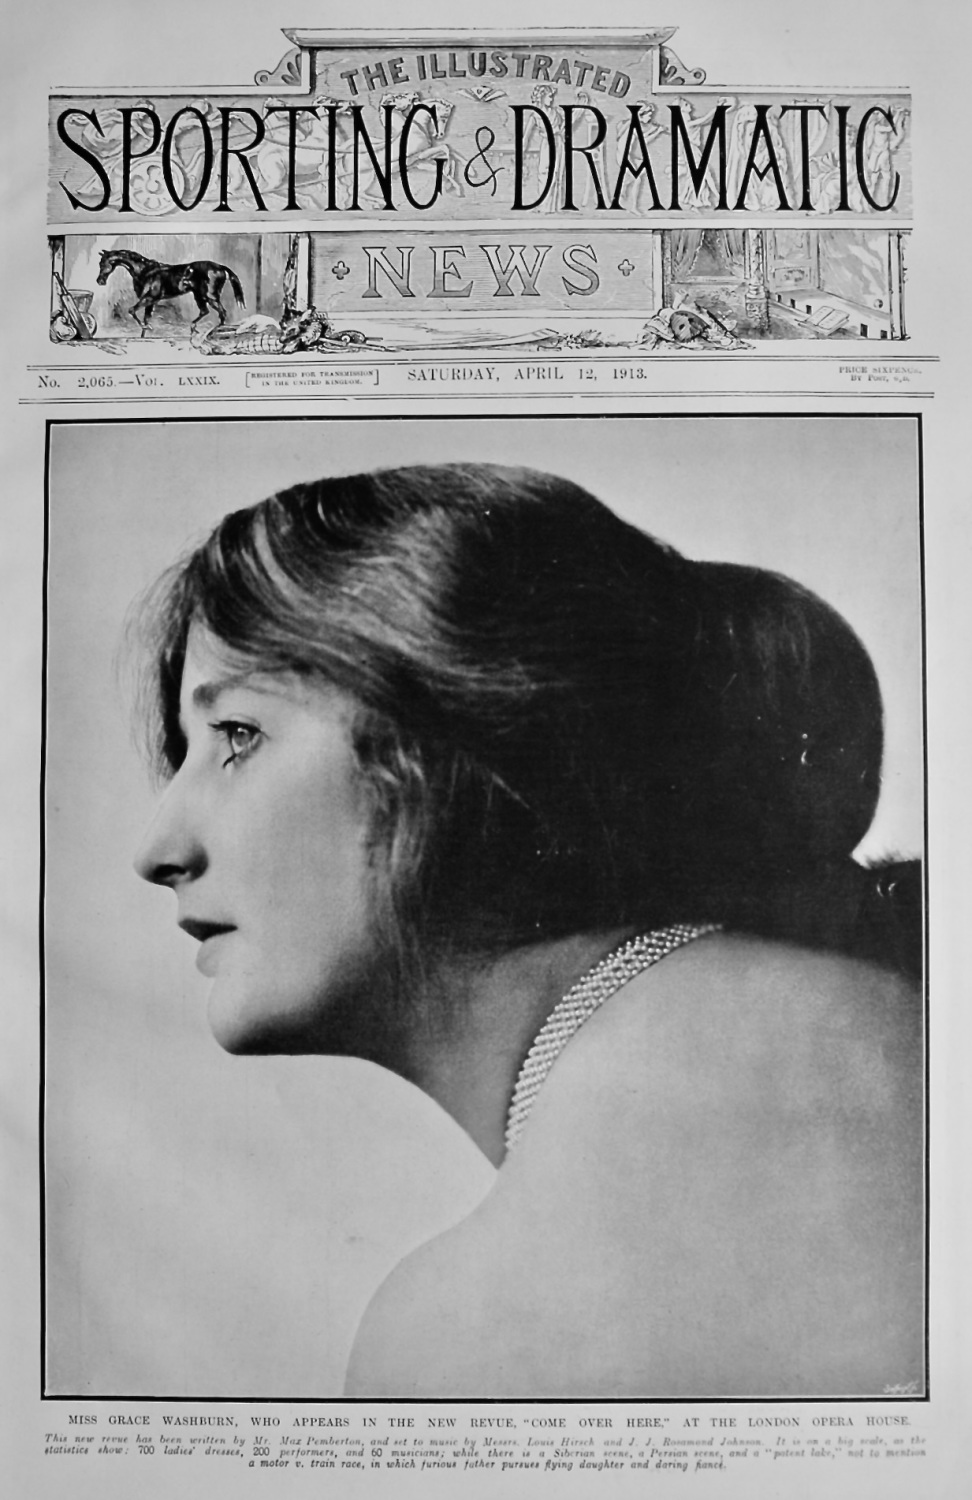 Miss Grace Washburn, who appears in the New Revue, 